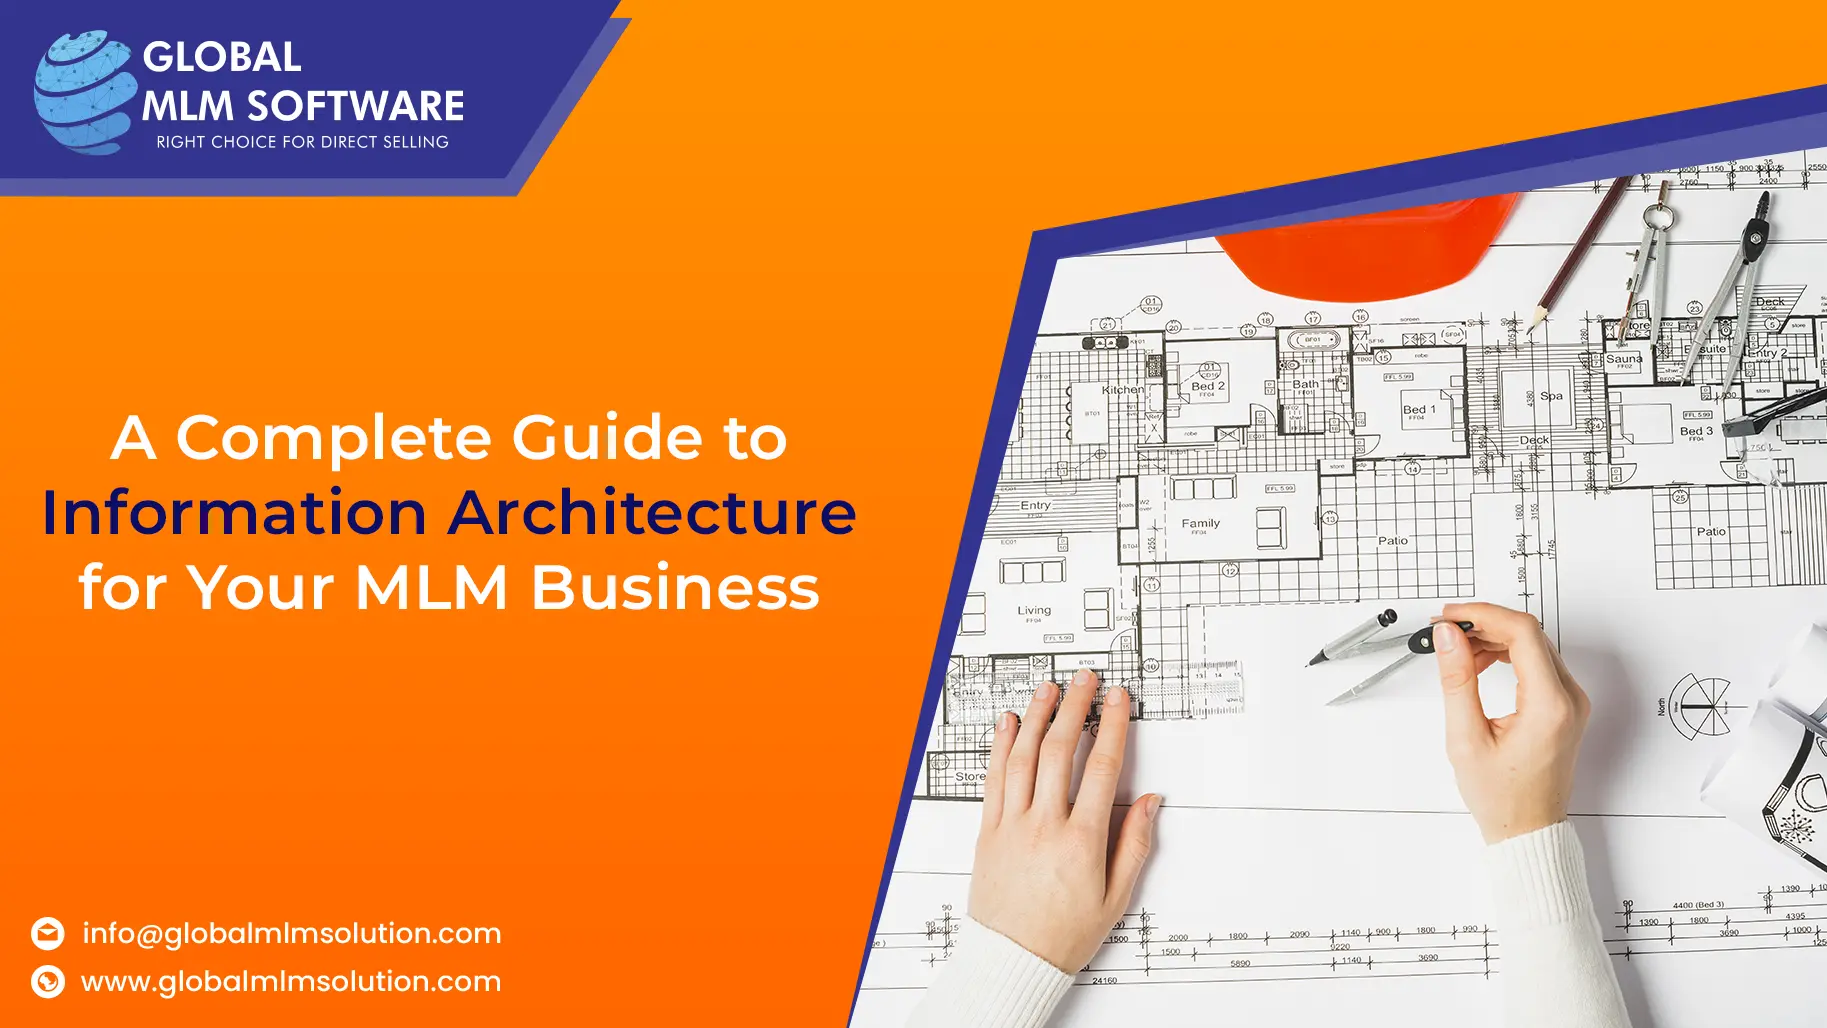 A Complete Guide to Information Architecture for MLM Business